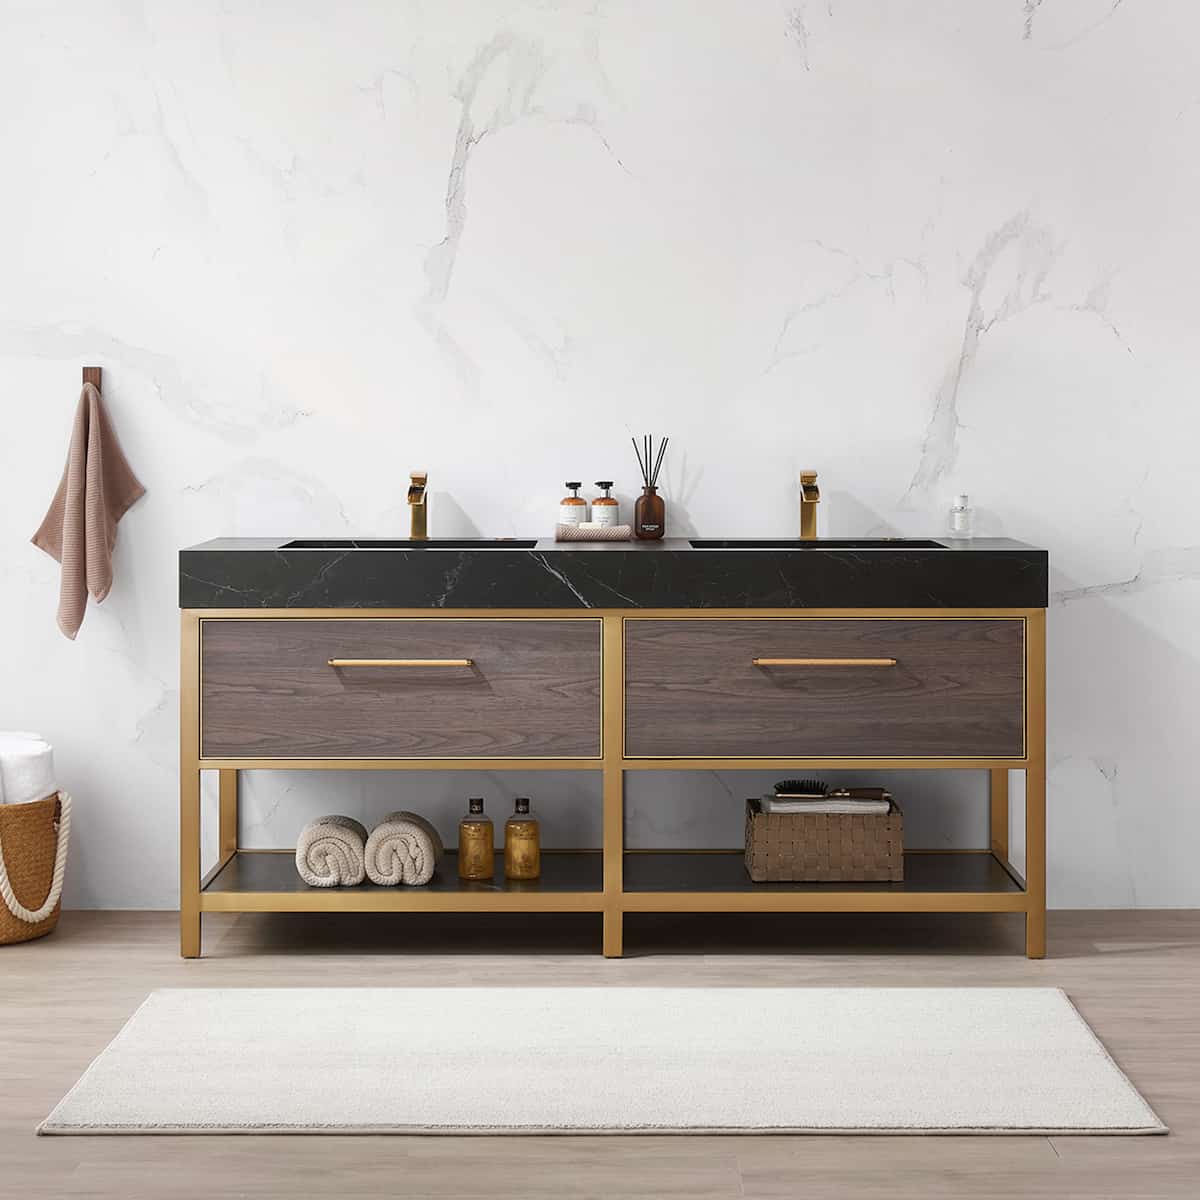 Vinnova Segovia 72 Inch Freestanding Double Sink Bath Vanity in Suleiman Oak with Black Sintered Stone Top Without Mirror in Bathroom 702072-SO-SL-NM #mirror_without mirror